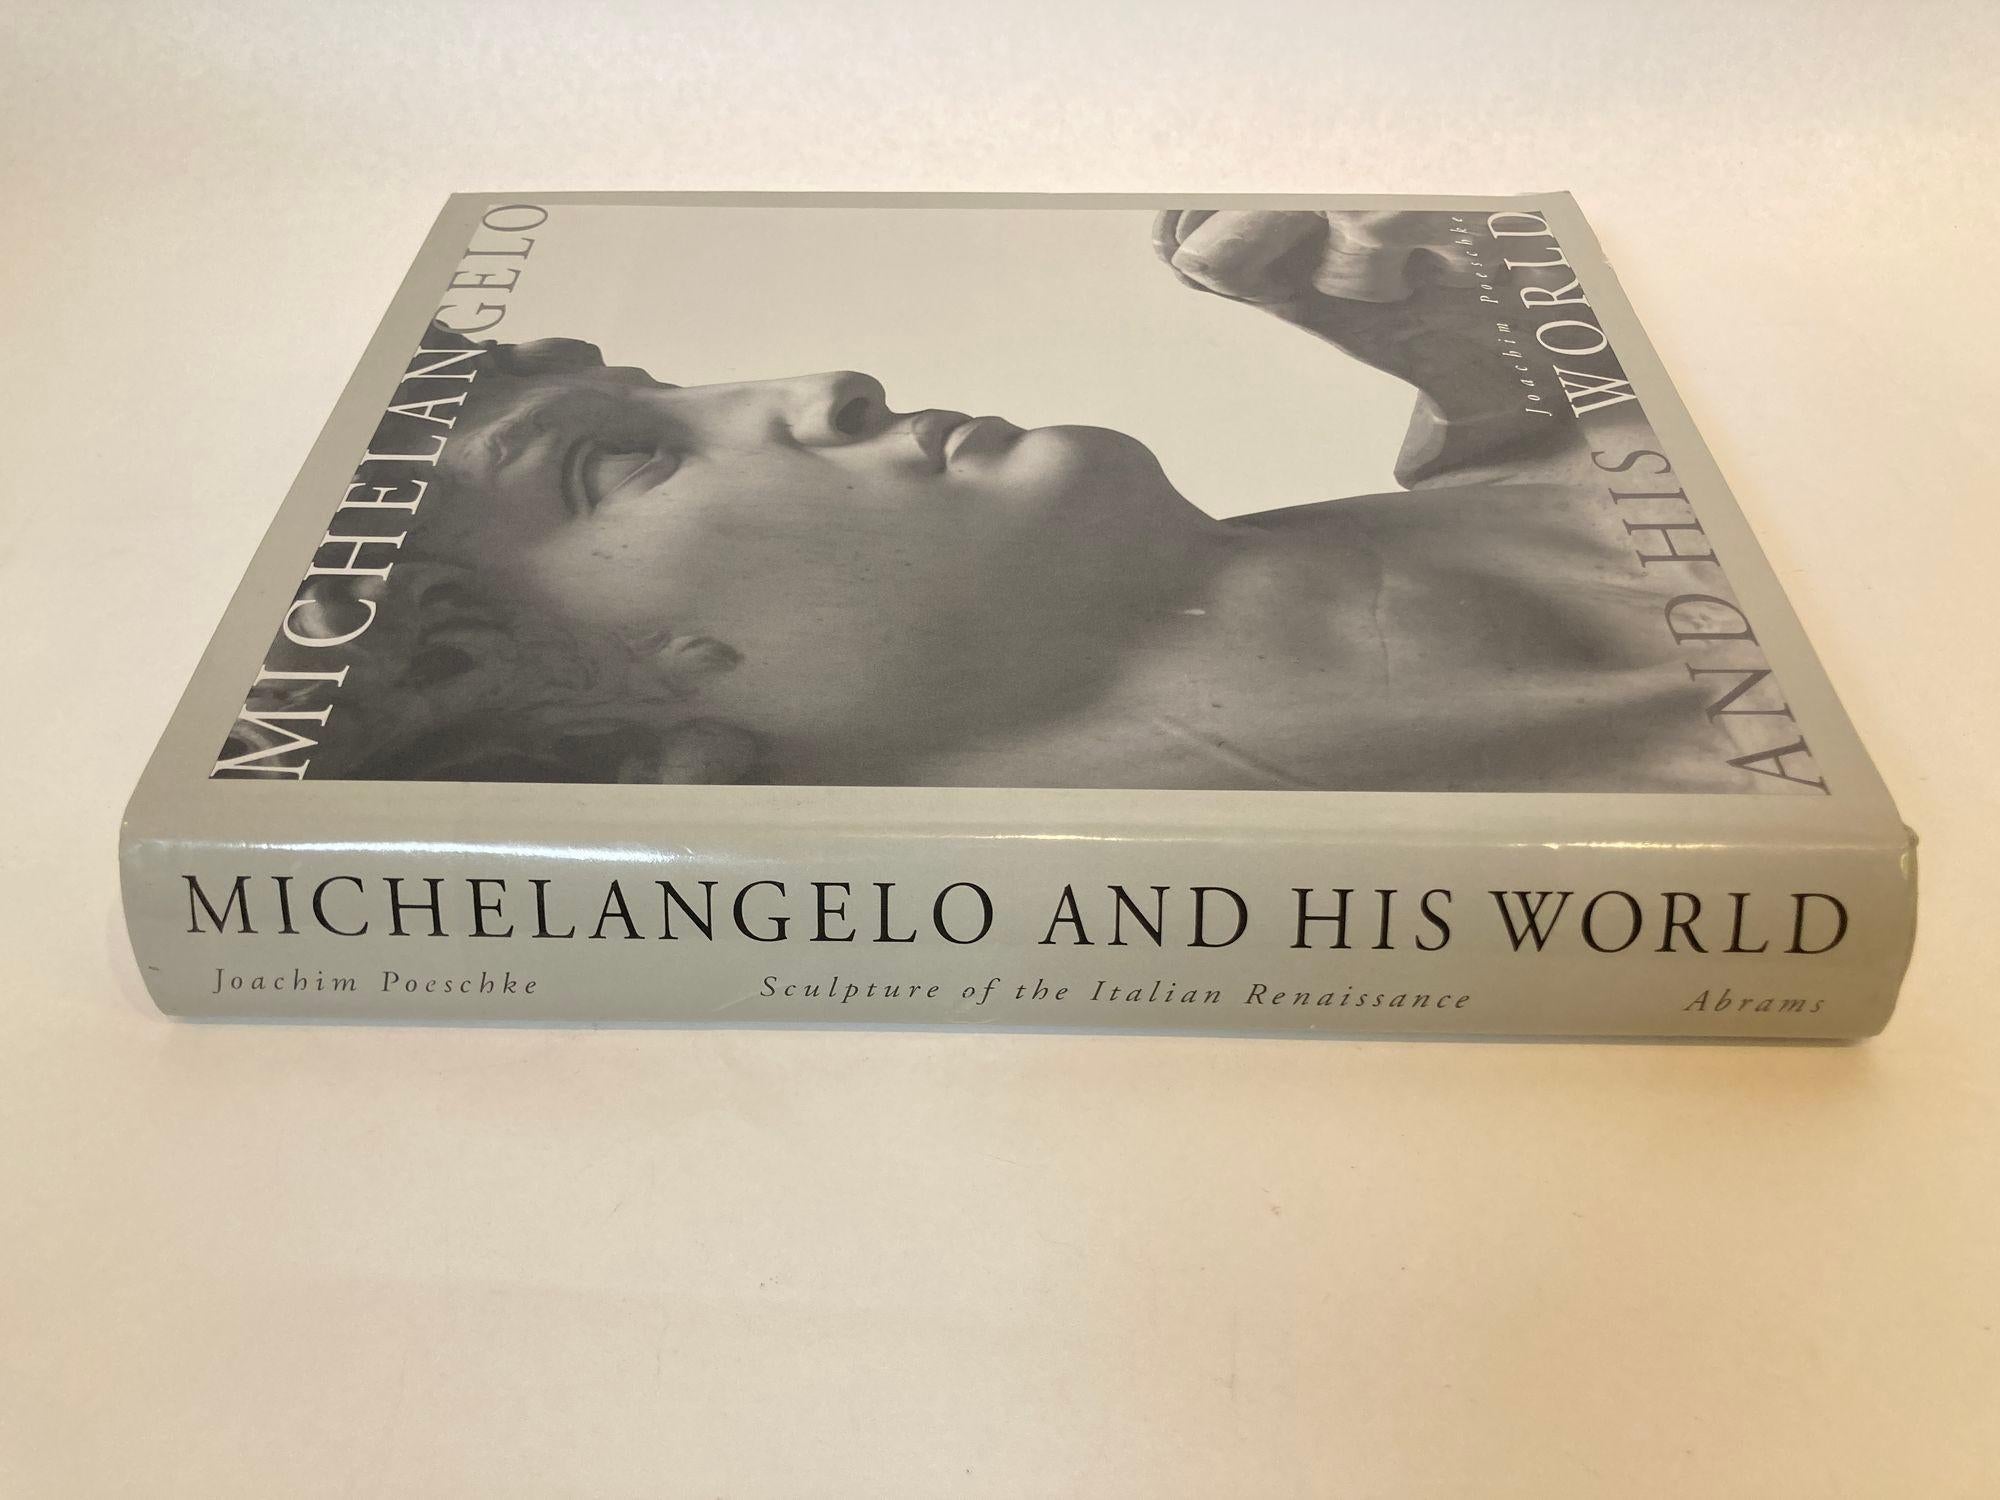 1996 Michelangelo And His World Hardcover book by Joachim Poeschke For Sale 3